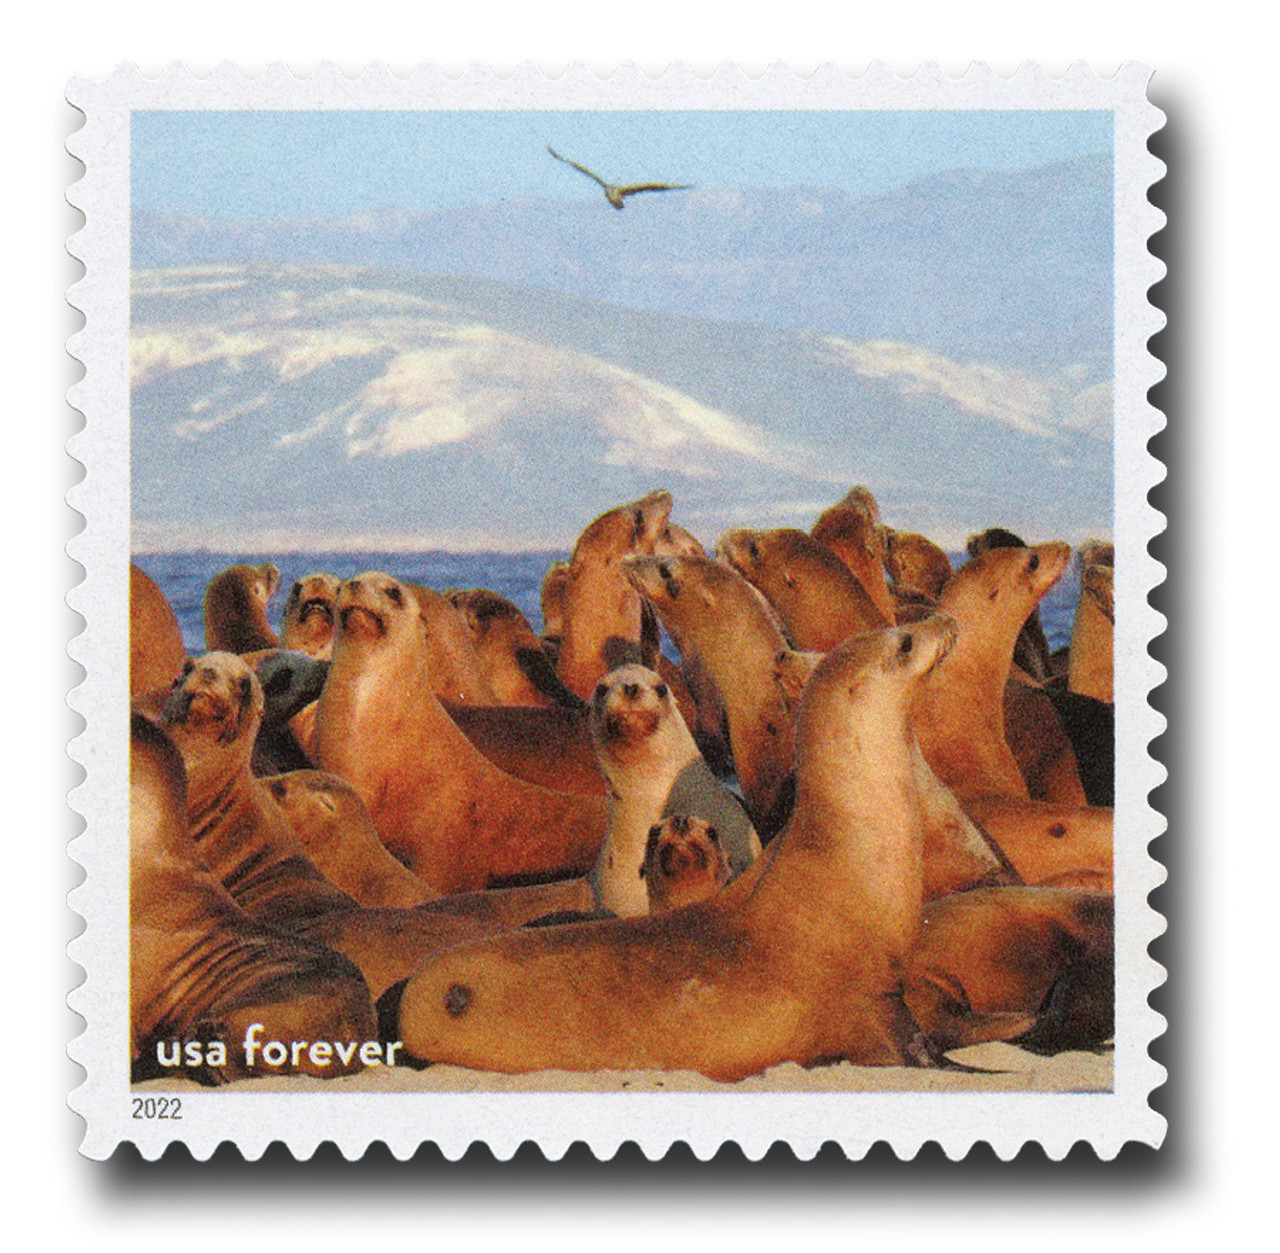 15 Art of Magic US Forever postage stamps – Tiny and Snail